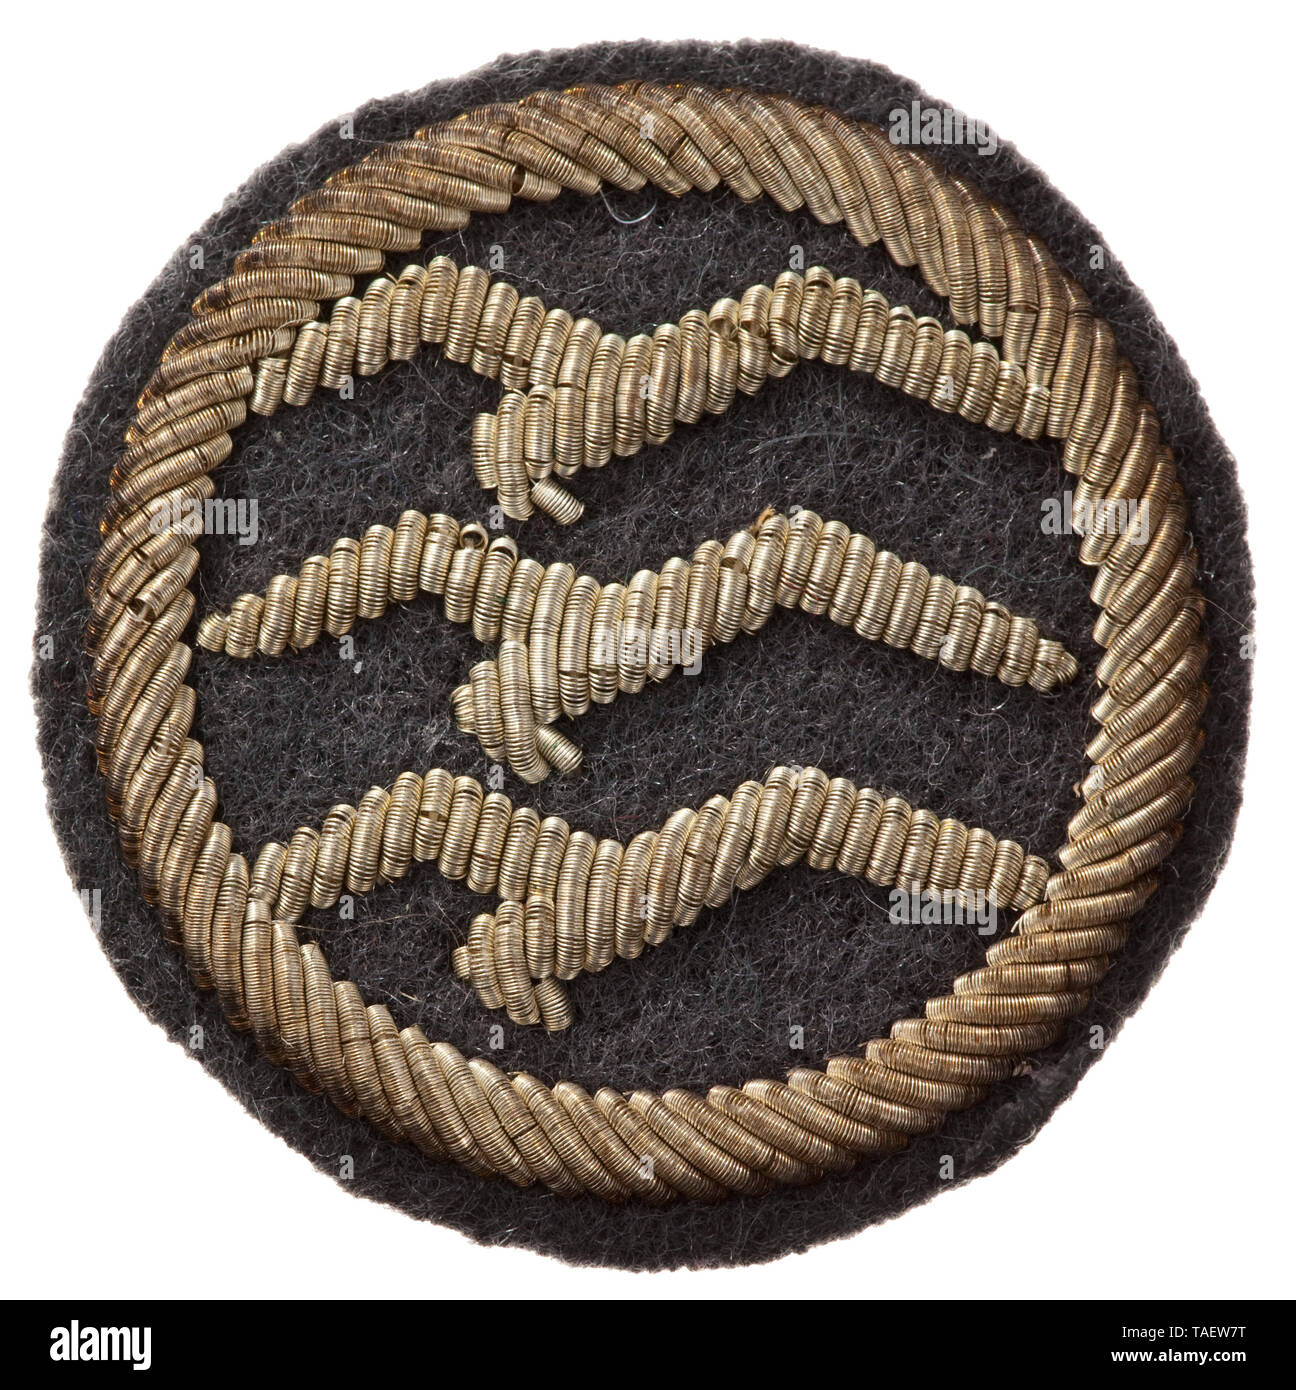 A glider pilot's badge 'C' certificate in officer quality cloth issue Drei silberne, handgestickte Schwingen im Kranz auf grauem Wollfilz-Grund. Trage- und Altersspuren. Durchmesser ca. 30 mm. historic, historical, Air Force, branch of service, branches of service, armed service, armed services, military, militaria, air forces, object, objects, stills, clipping, clippings, cut out, cut-out, cut-outs, 20th century, Editorial-Use-Only Stock Photo